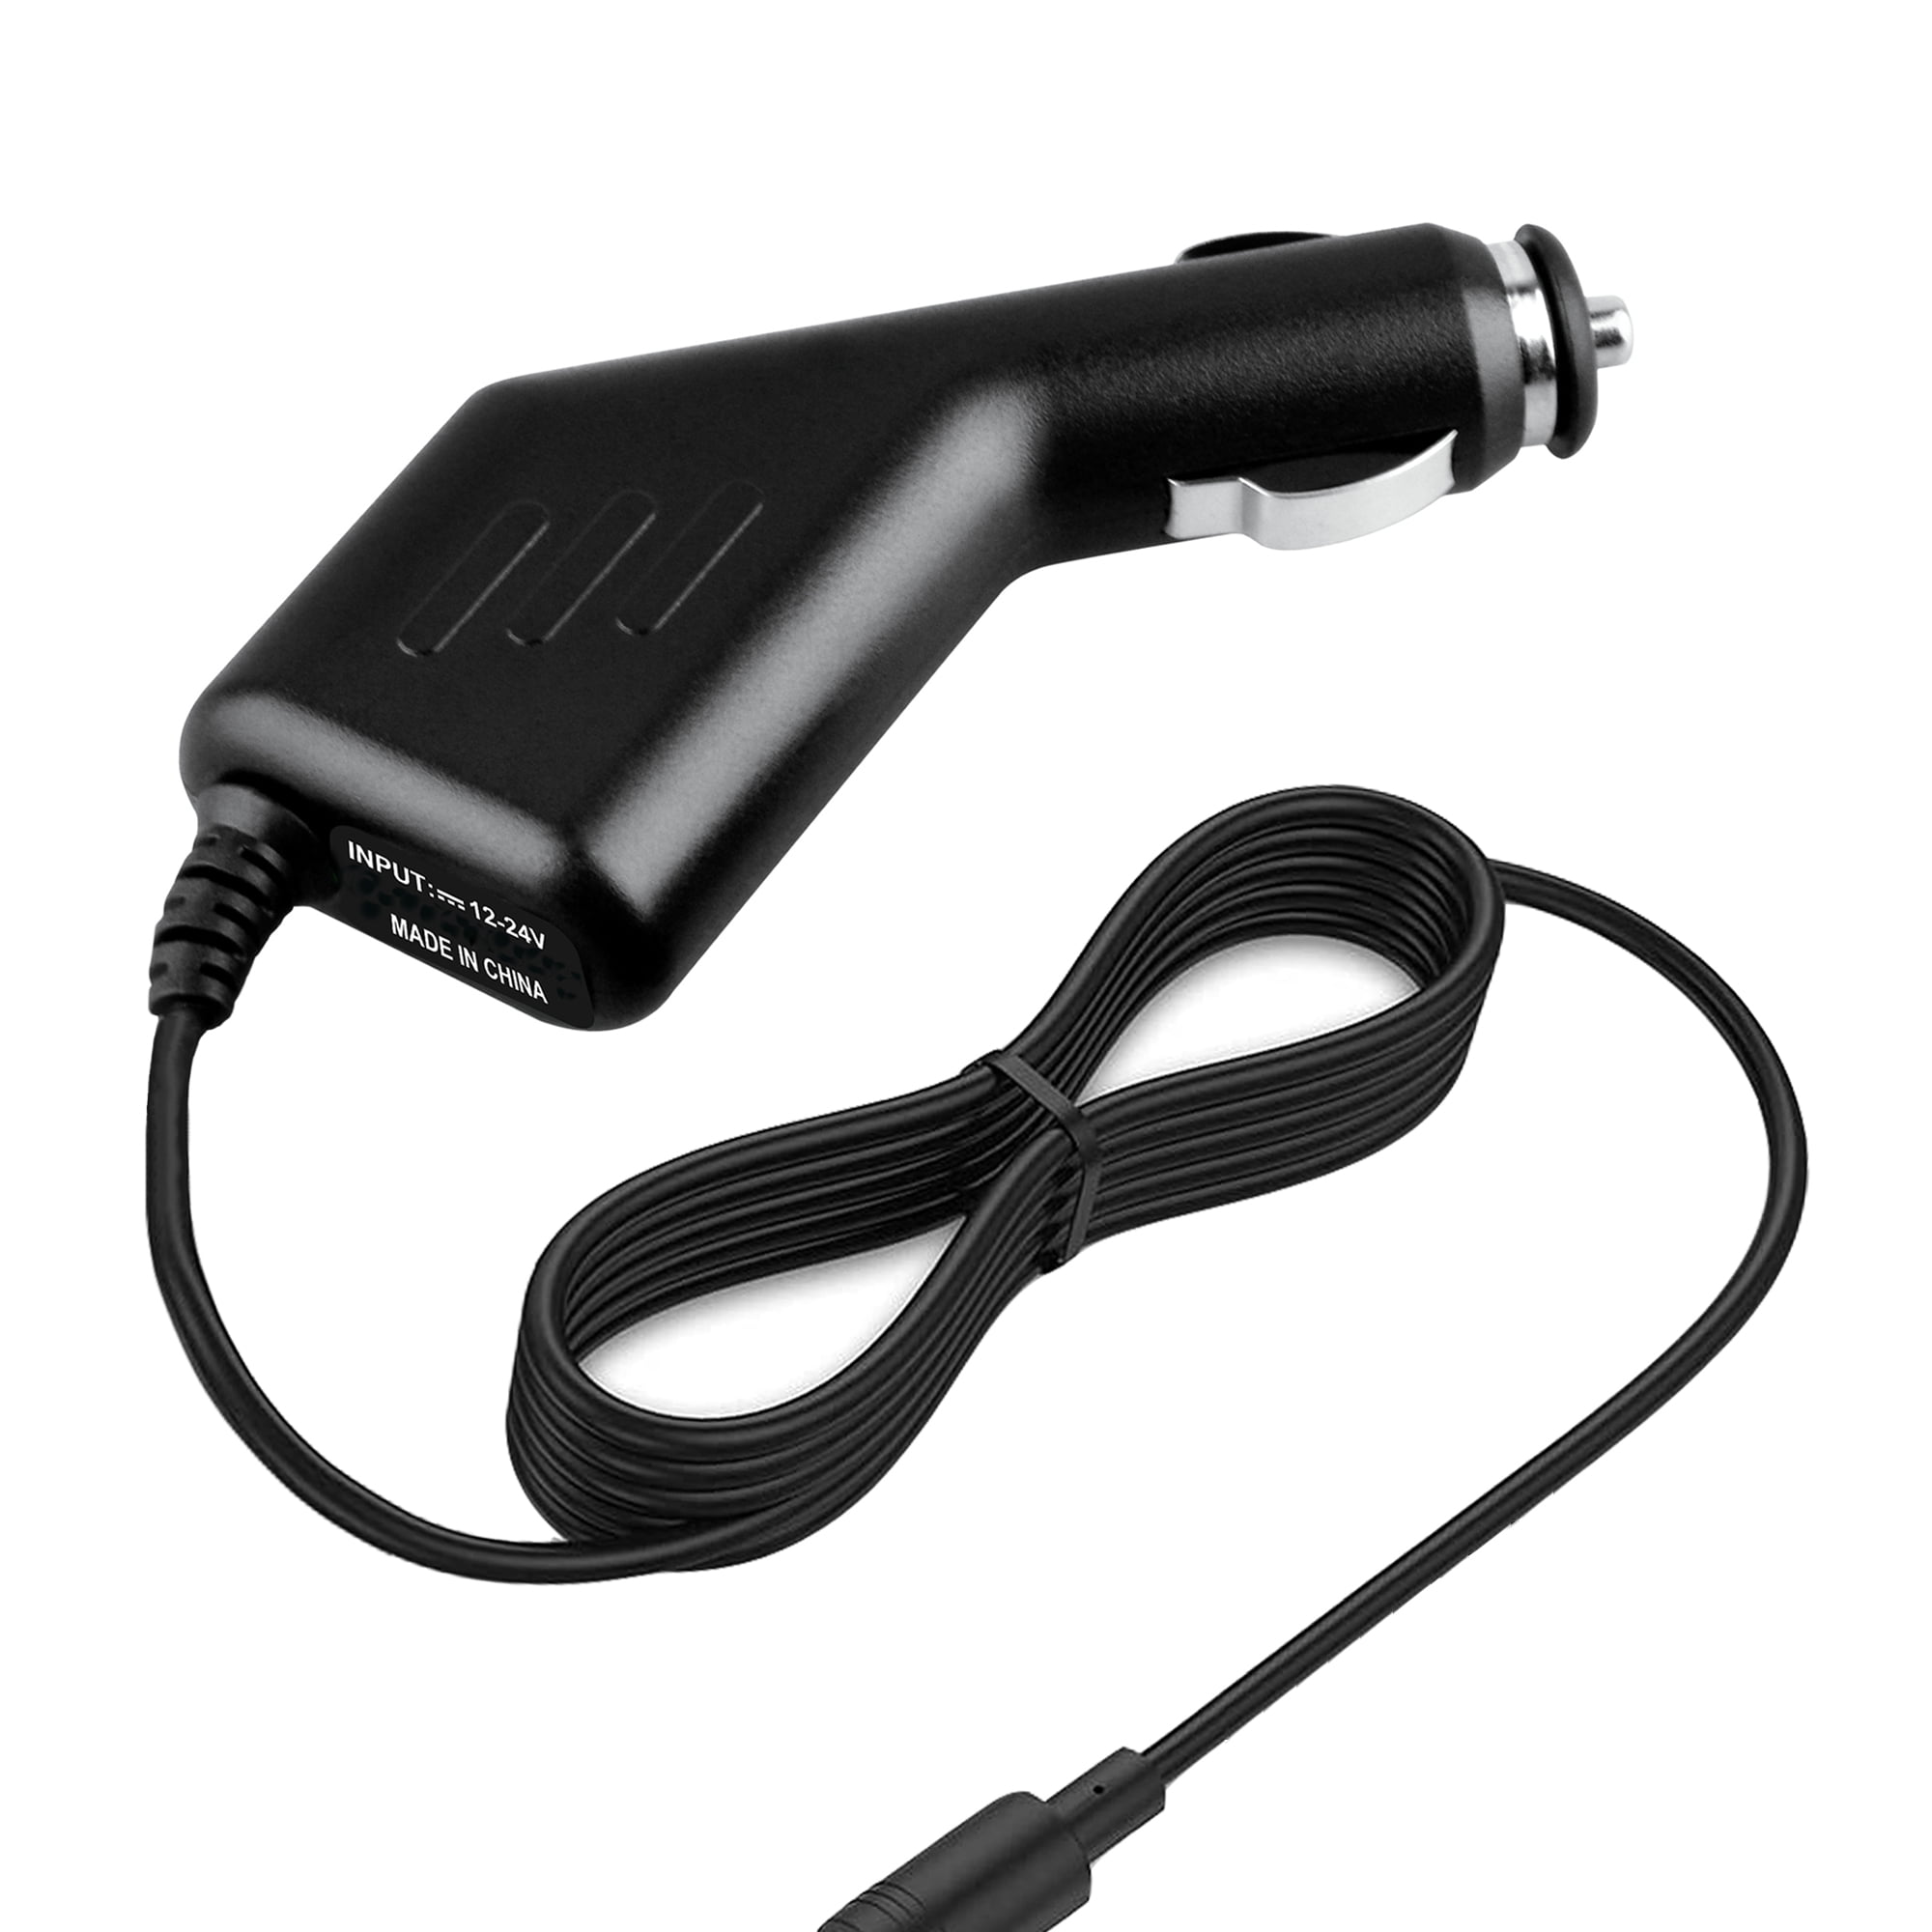 Car Charger Power Adapter For Garmin Nuvi 2495T 2495LMT 3550 LM/T 2789 LM/T GPS 